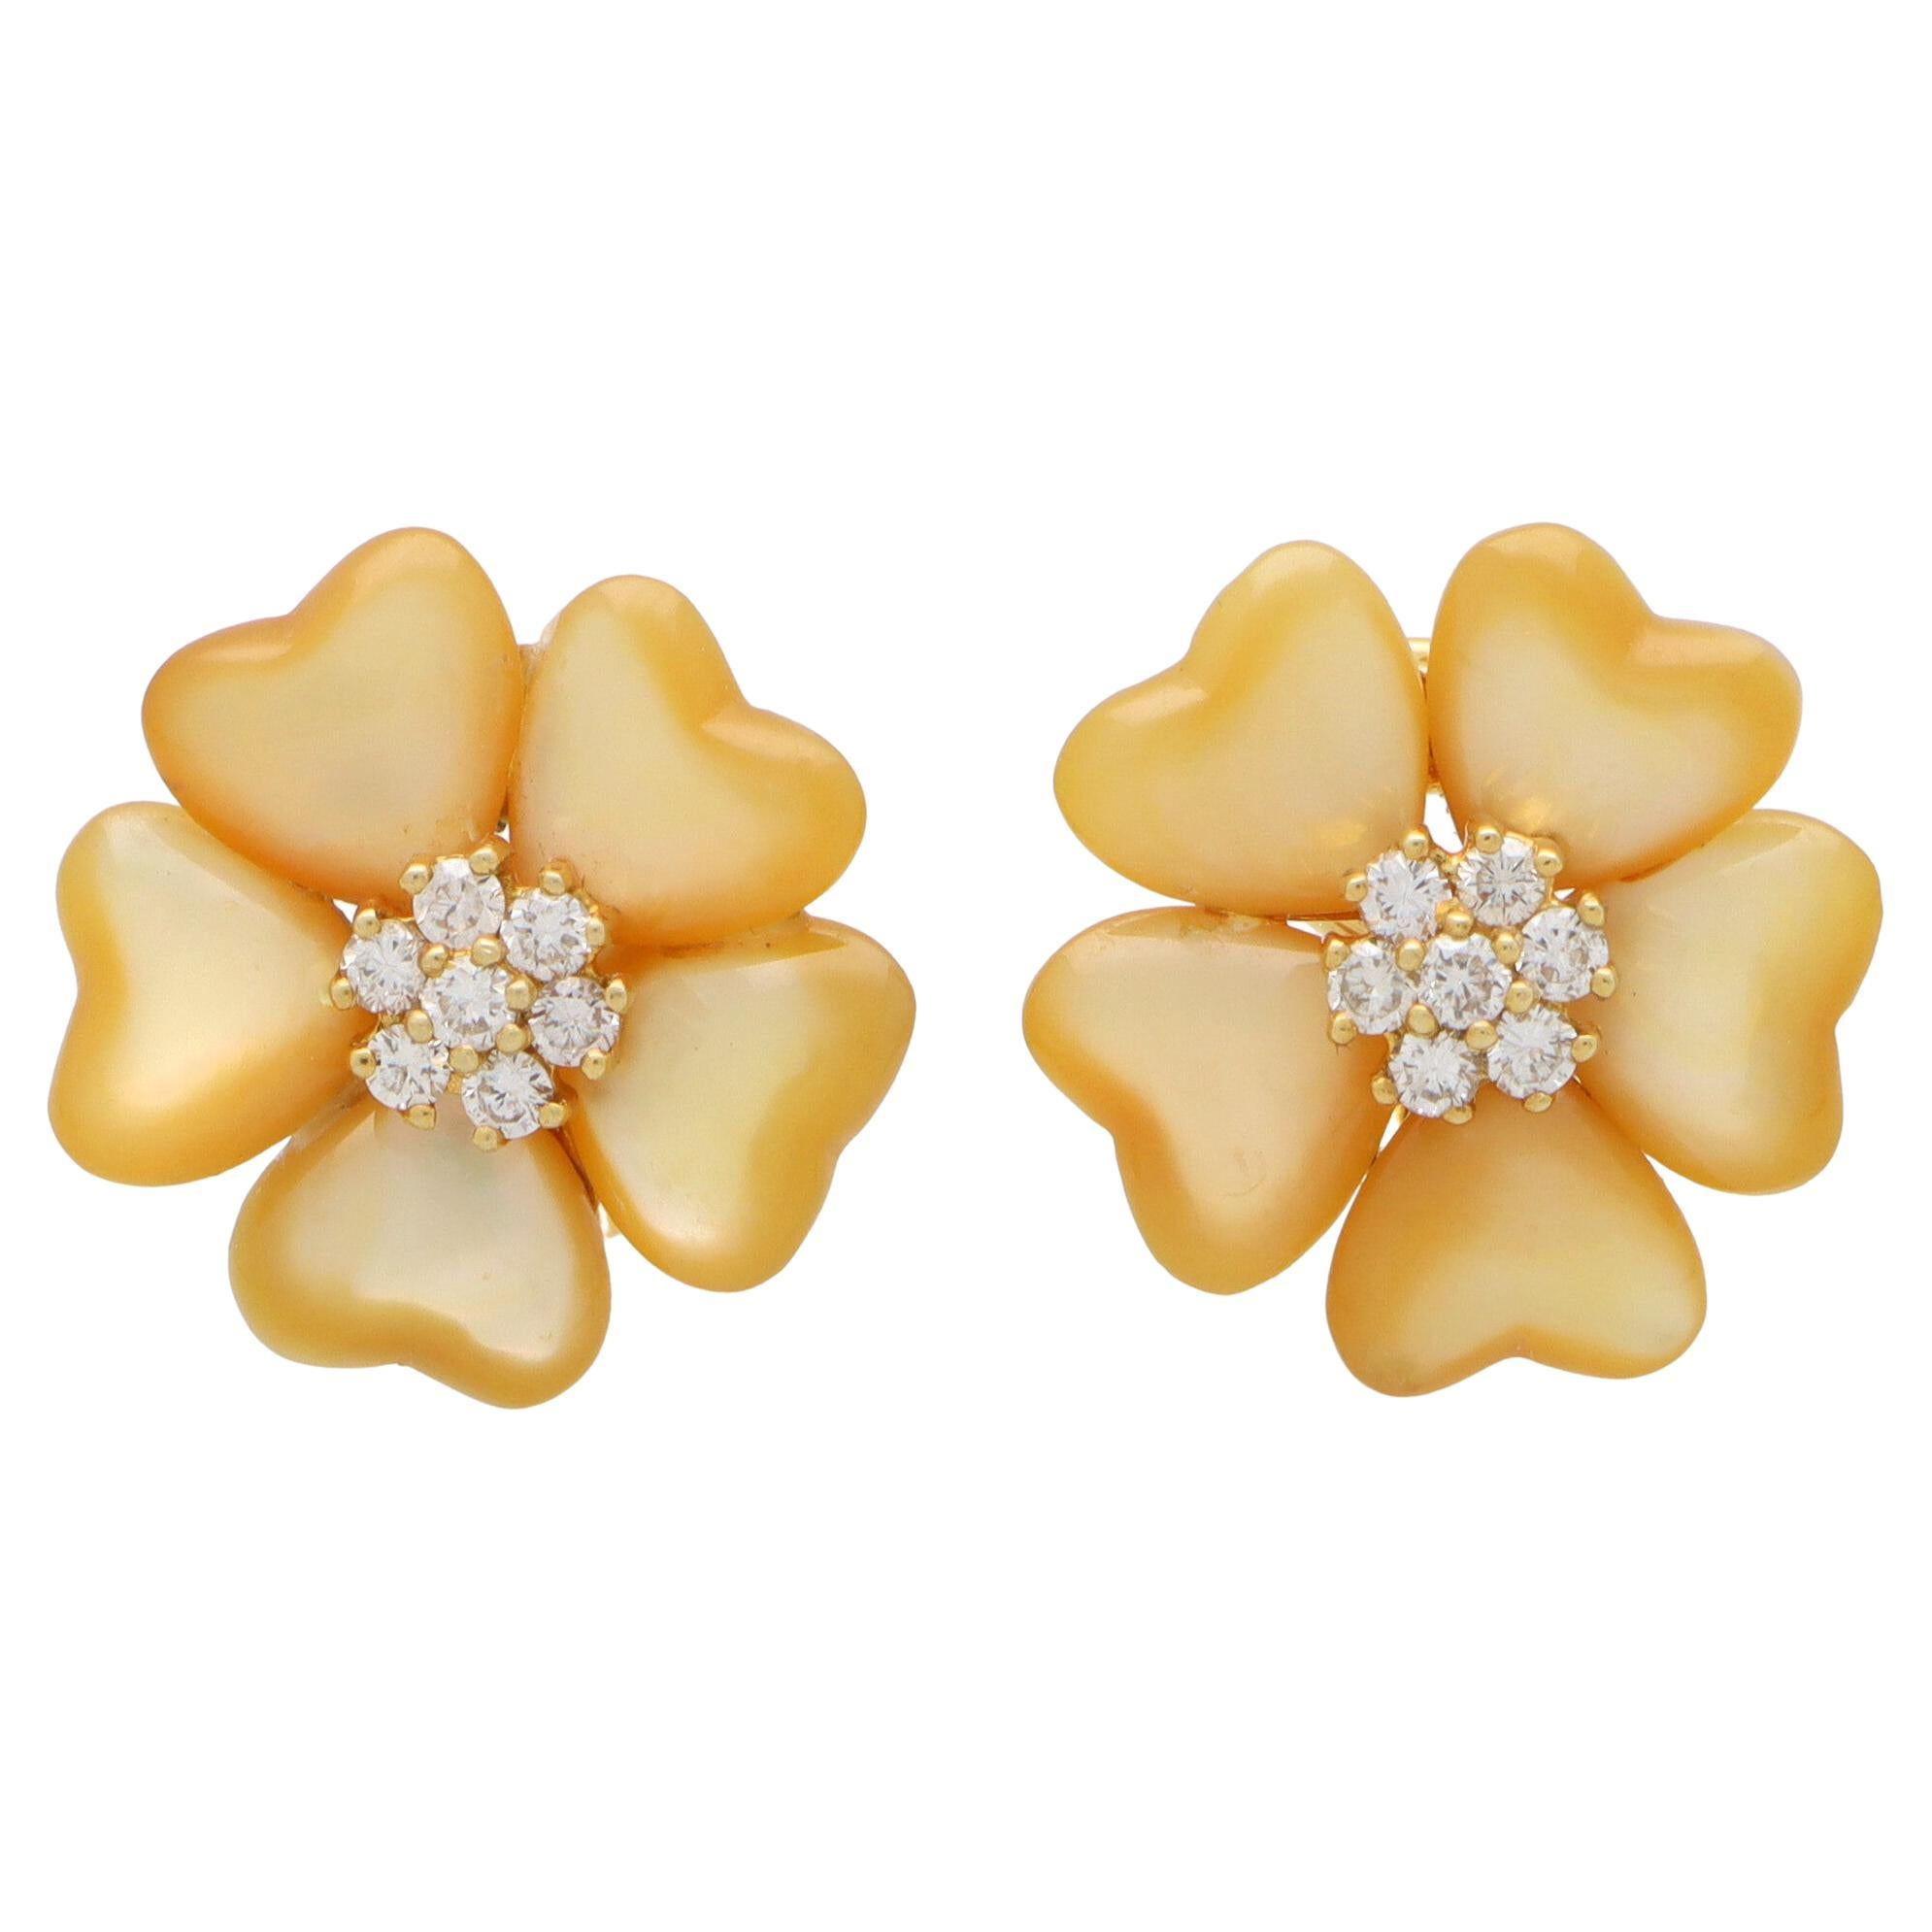 Vintage Mother-of-Pearl and Diamond Flower Earrings Set in 18k Yellow Gold